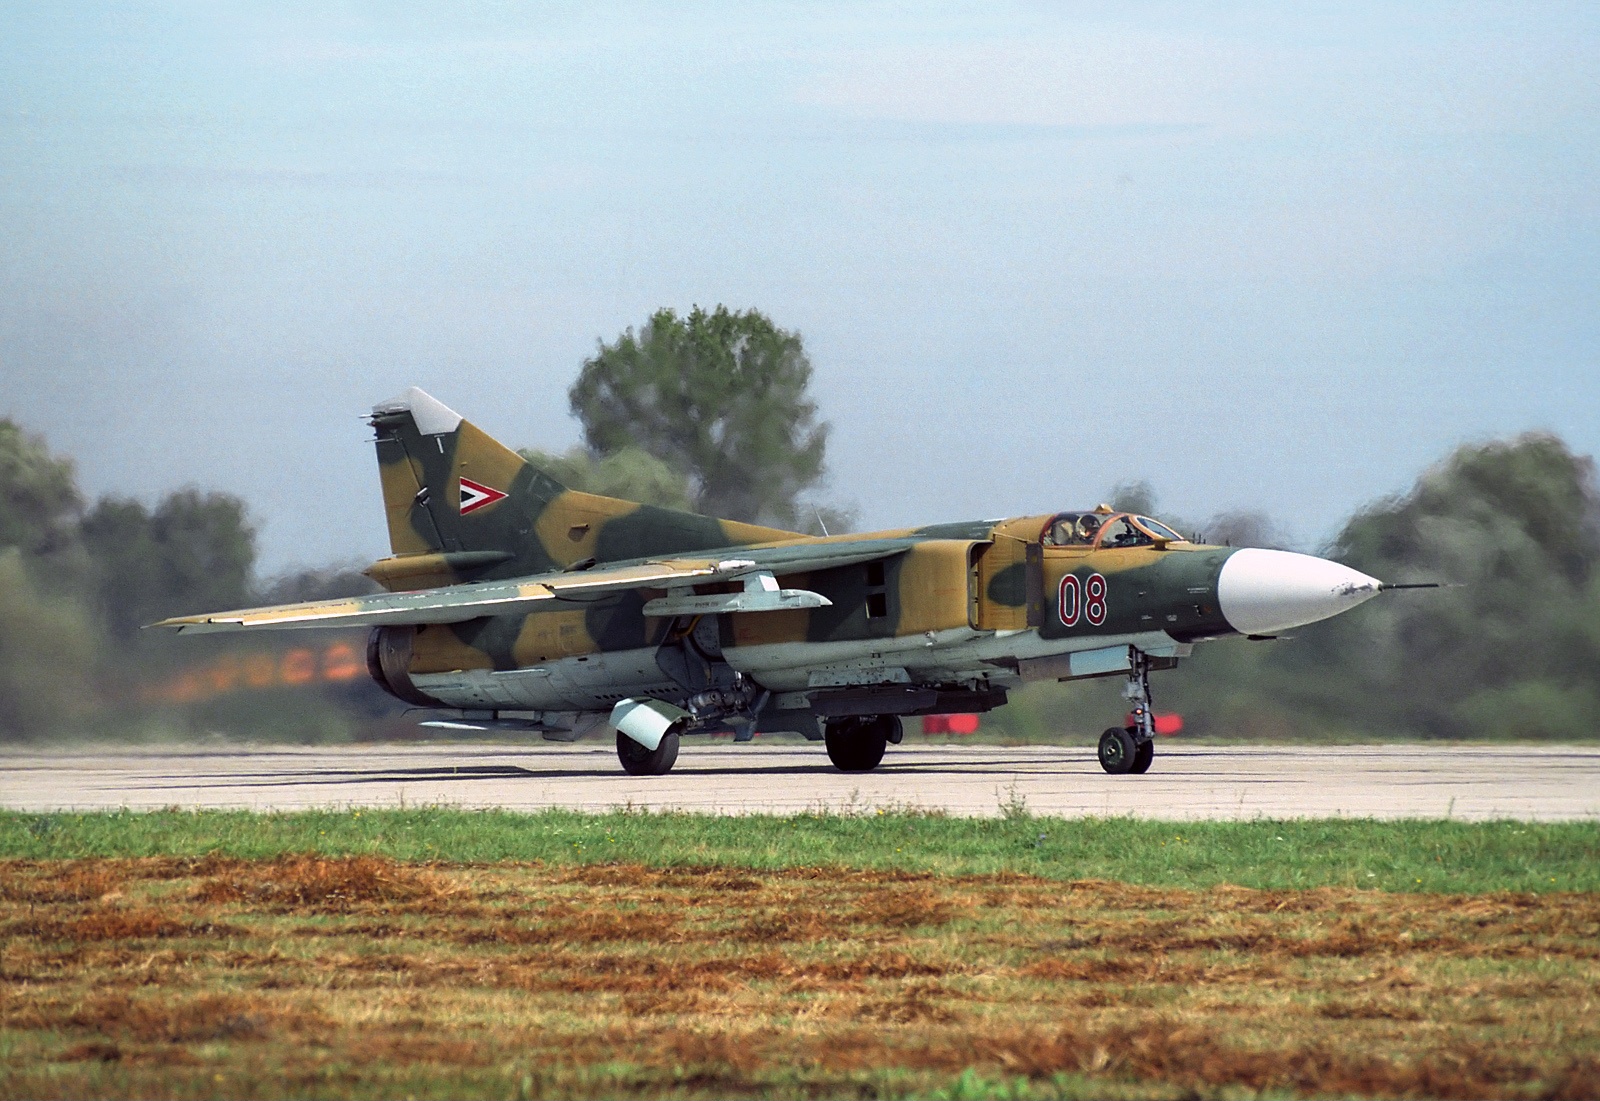 MiG-23MF Hungarian Air Force. Picture taken September 16, 1991